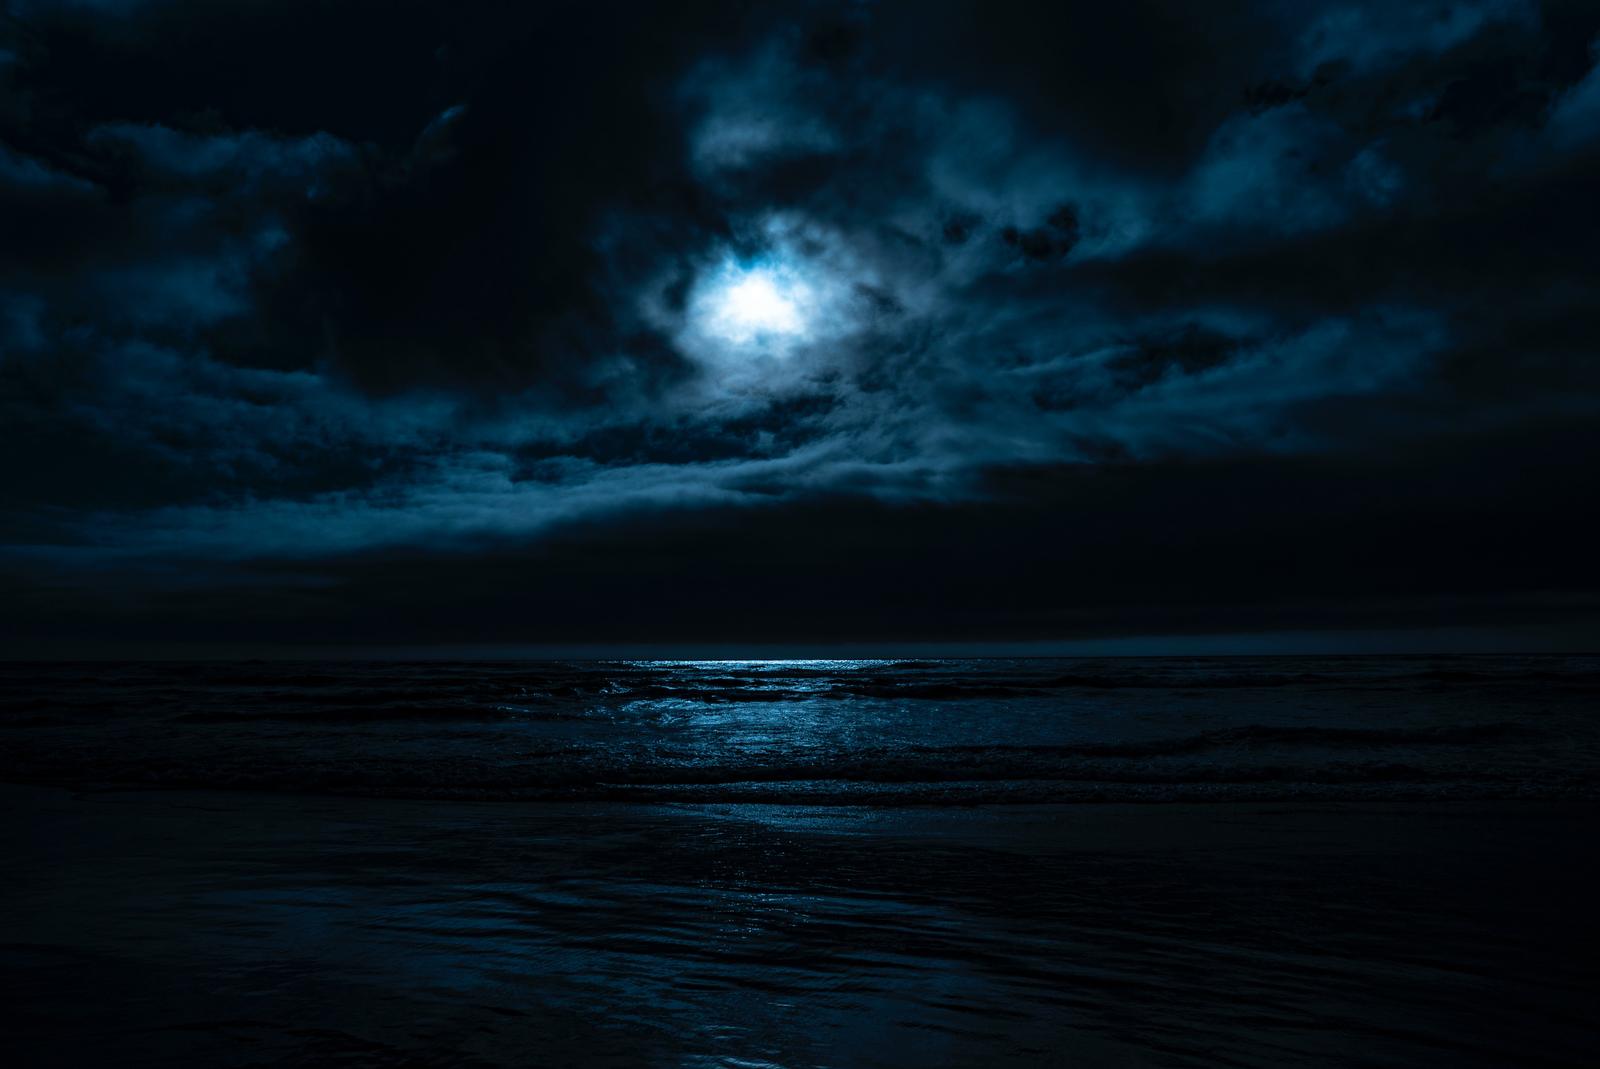 A view of the expansive sea on a cloudy night with a bright moon